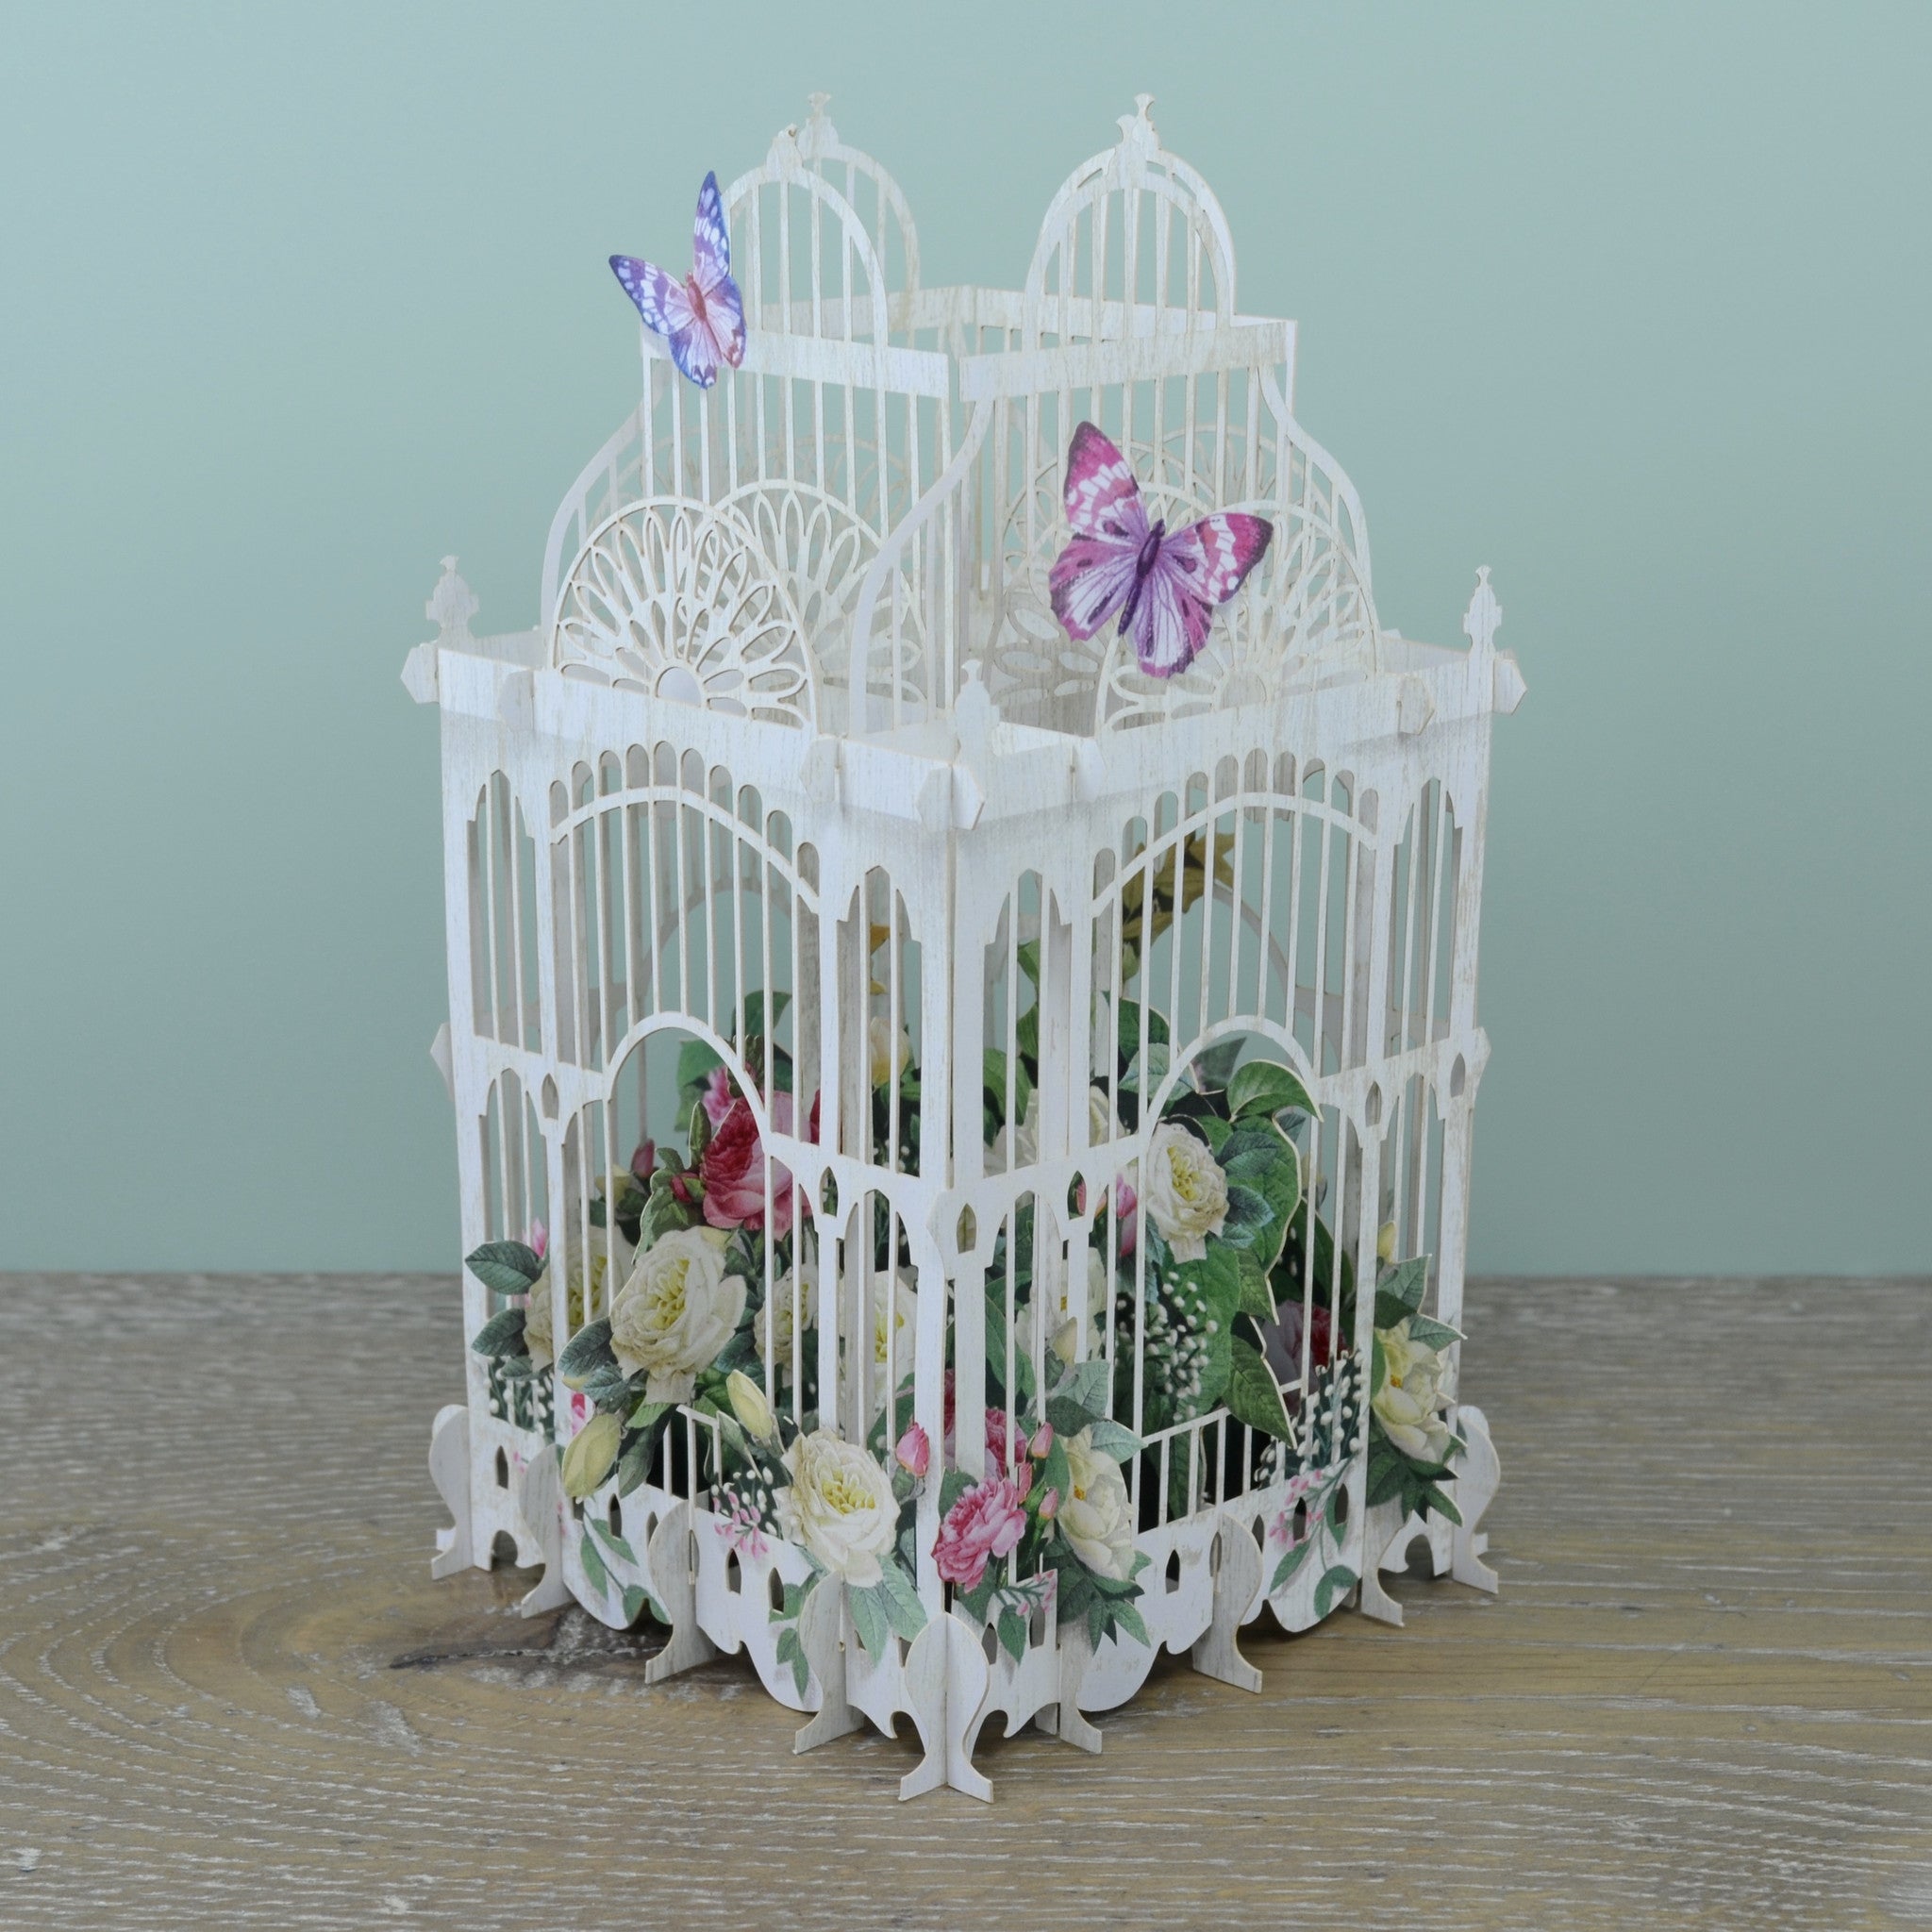 &quot;90 Today Flower Cage&quot; - 3D Pop Up Greetings Card